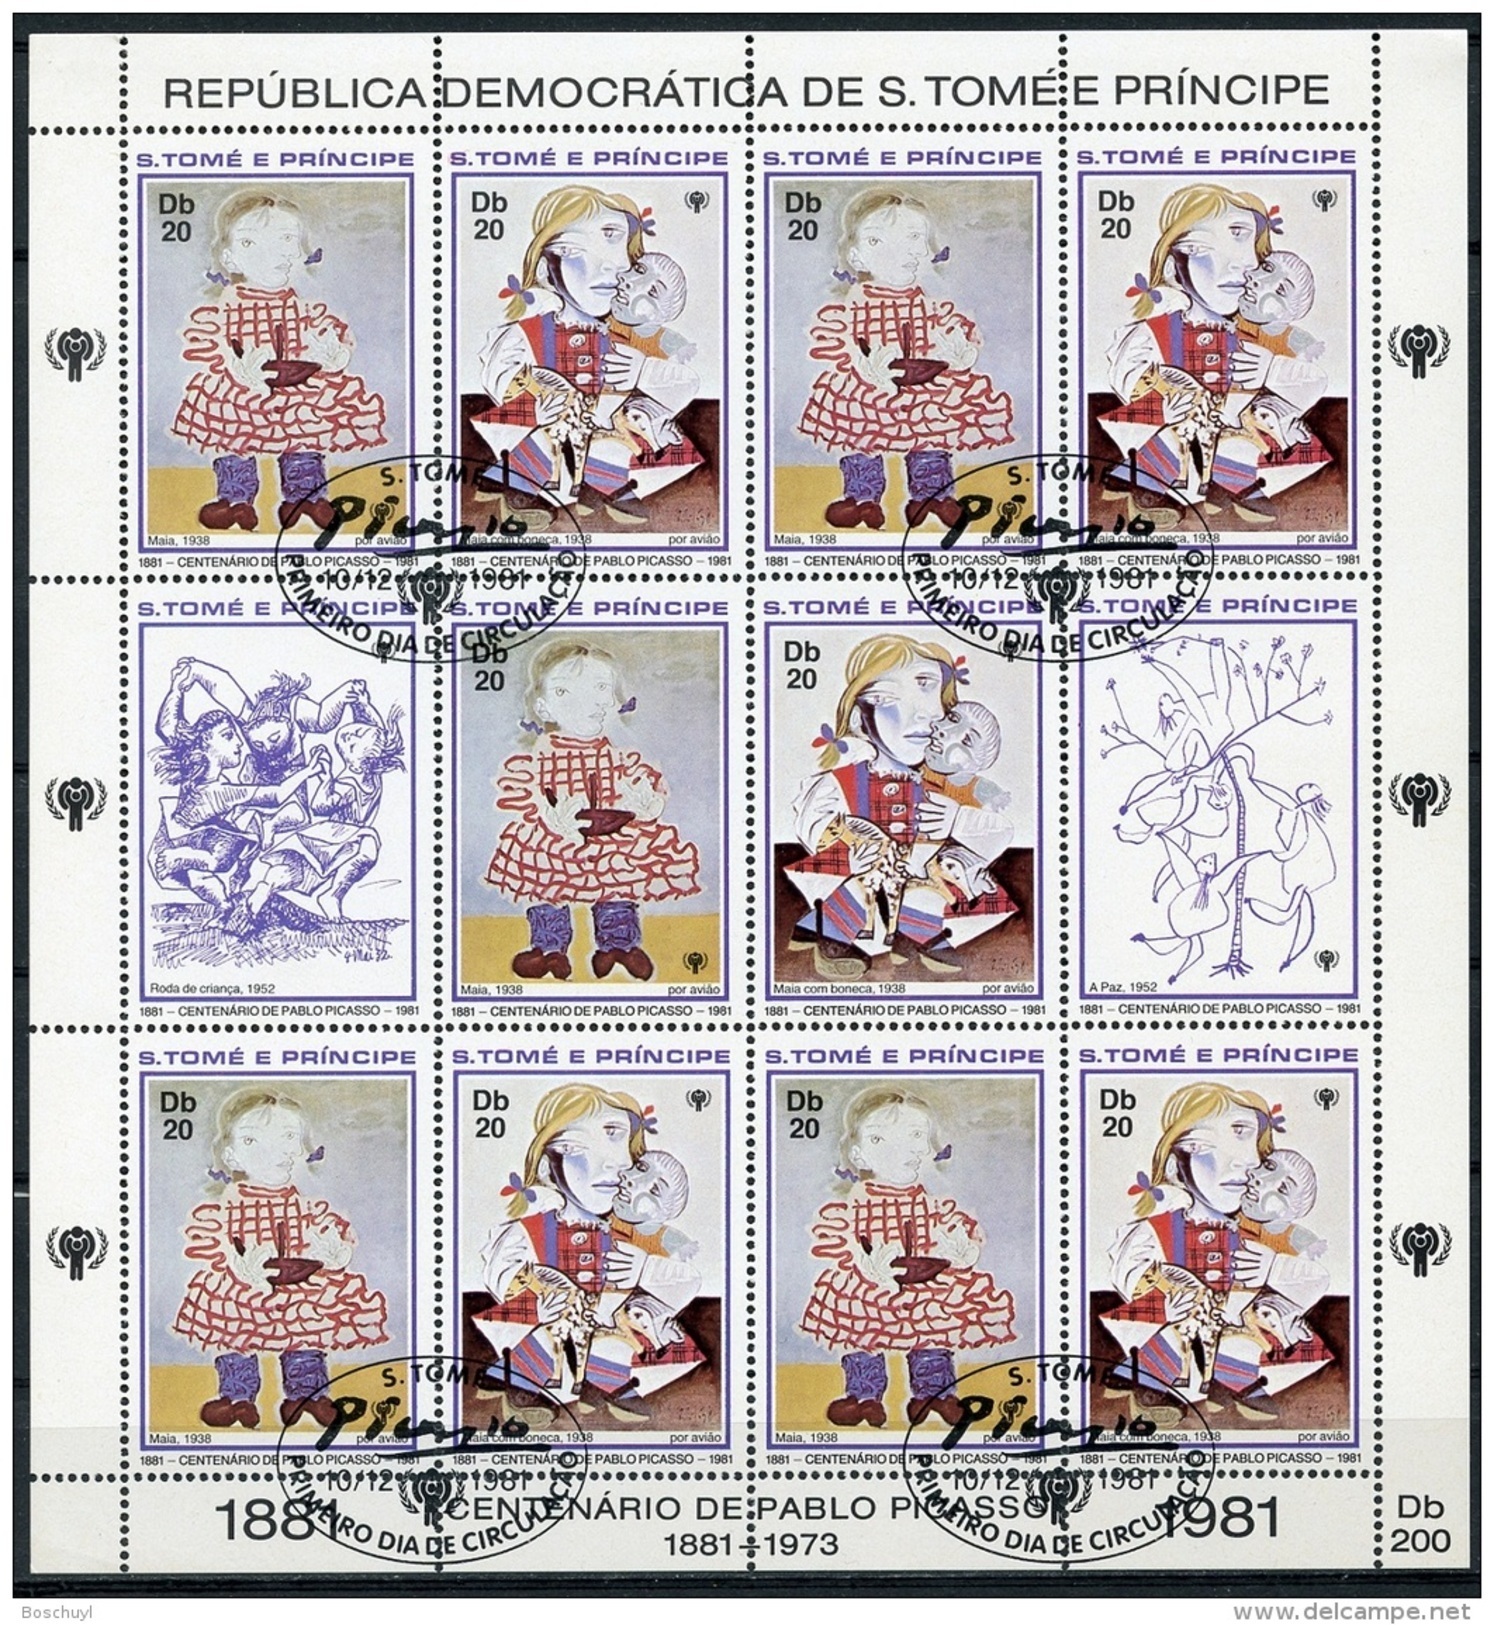 Sao Tome E Principe, 1981, Picasso, International Year Of The Child, IYC, United Nations, Cancelled Sheet, Michel 719-20 - Sao Tome En Principe